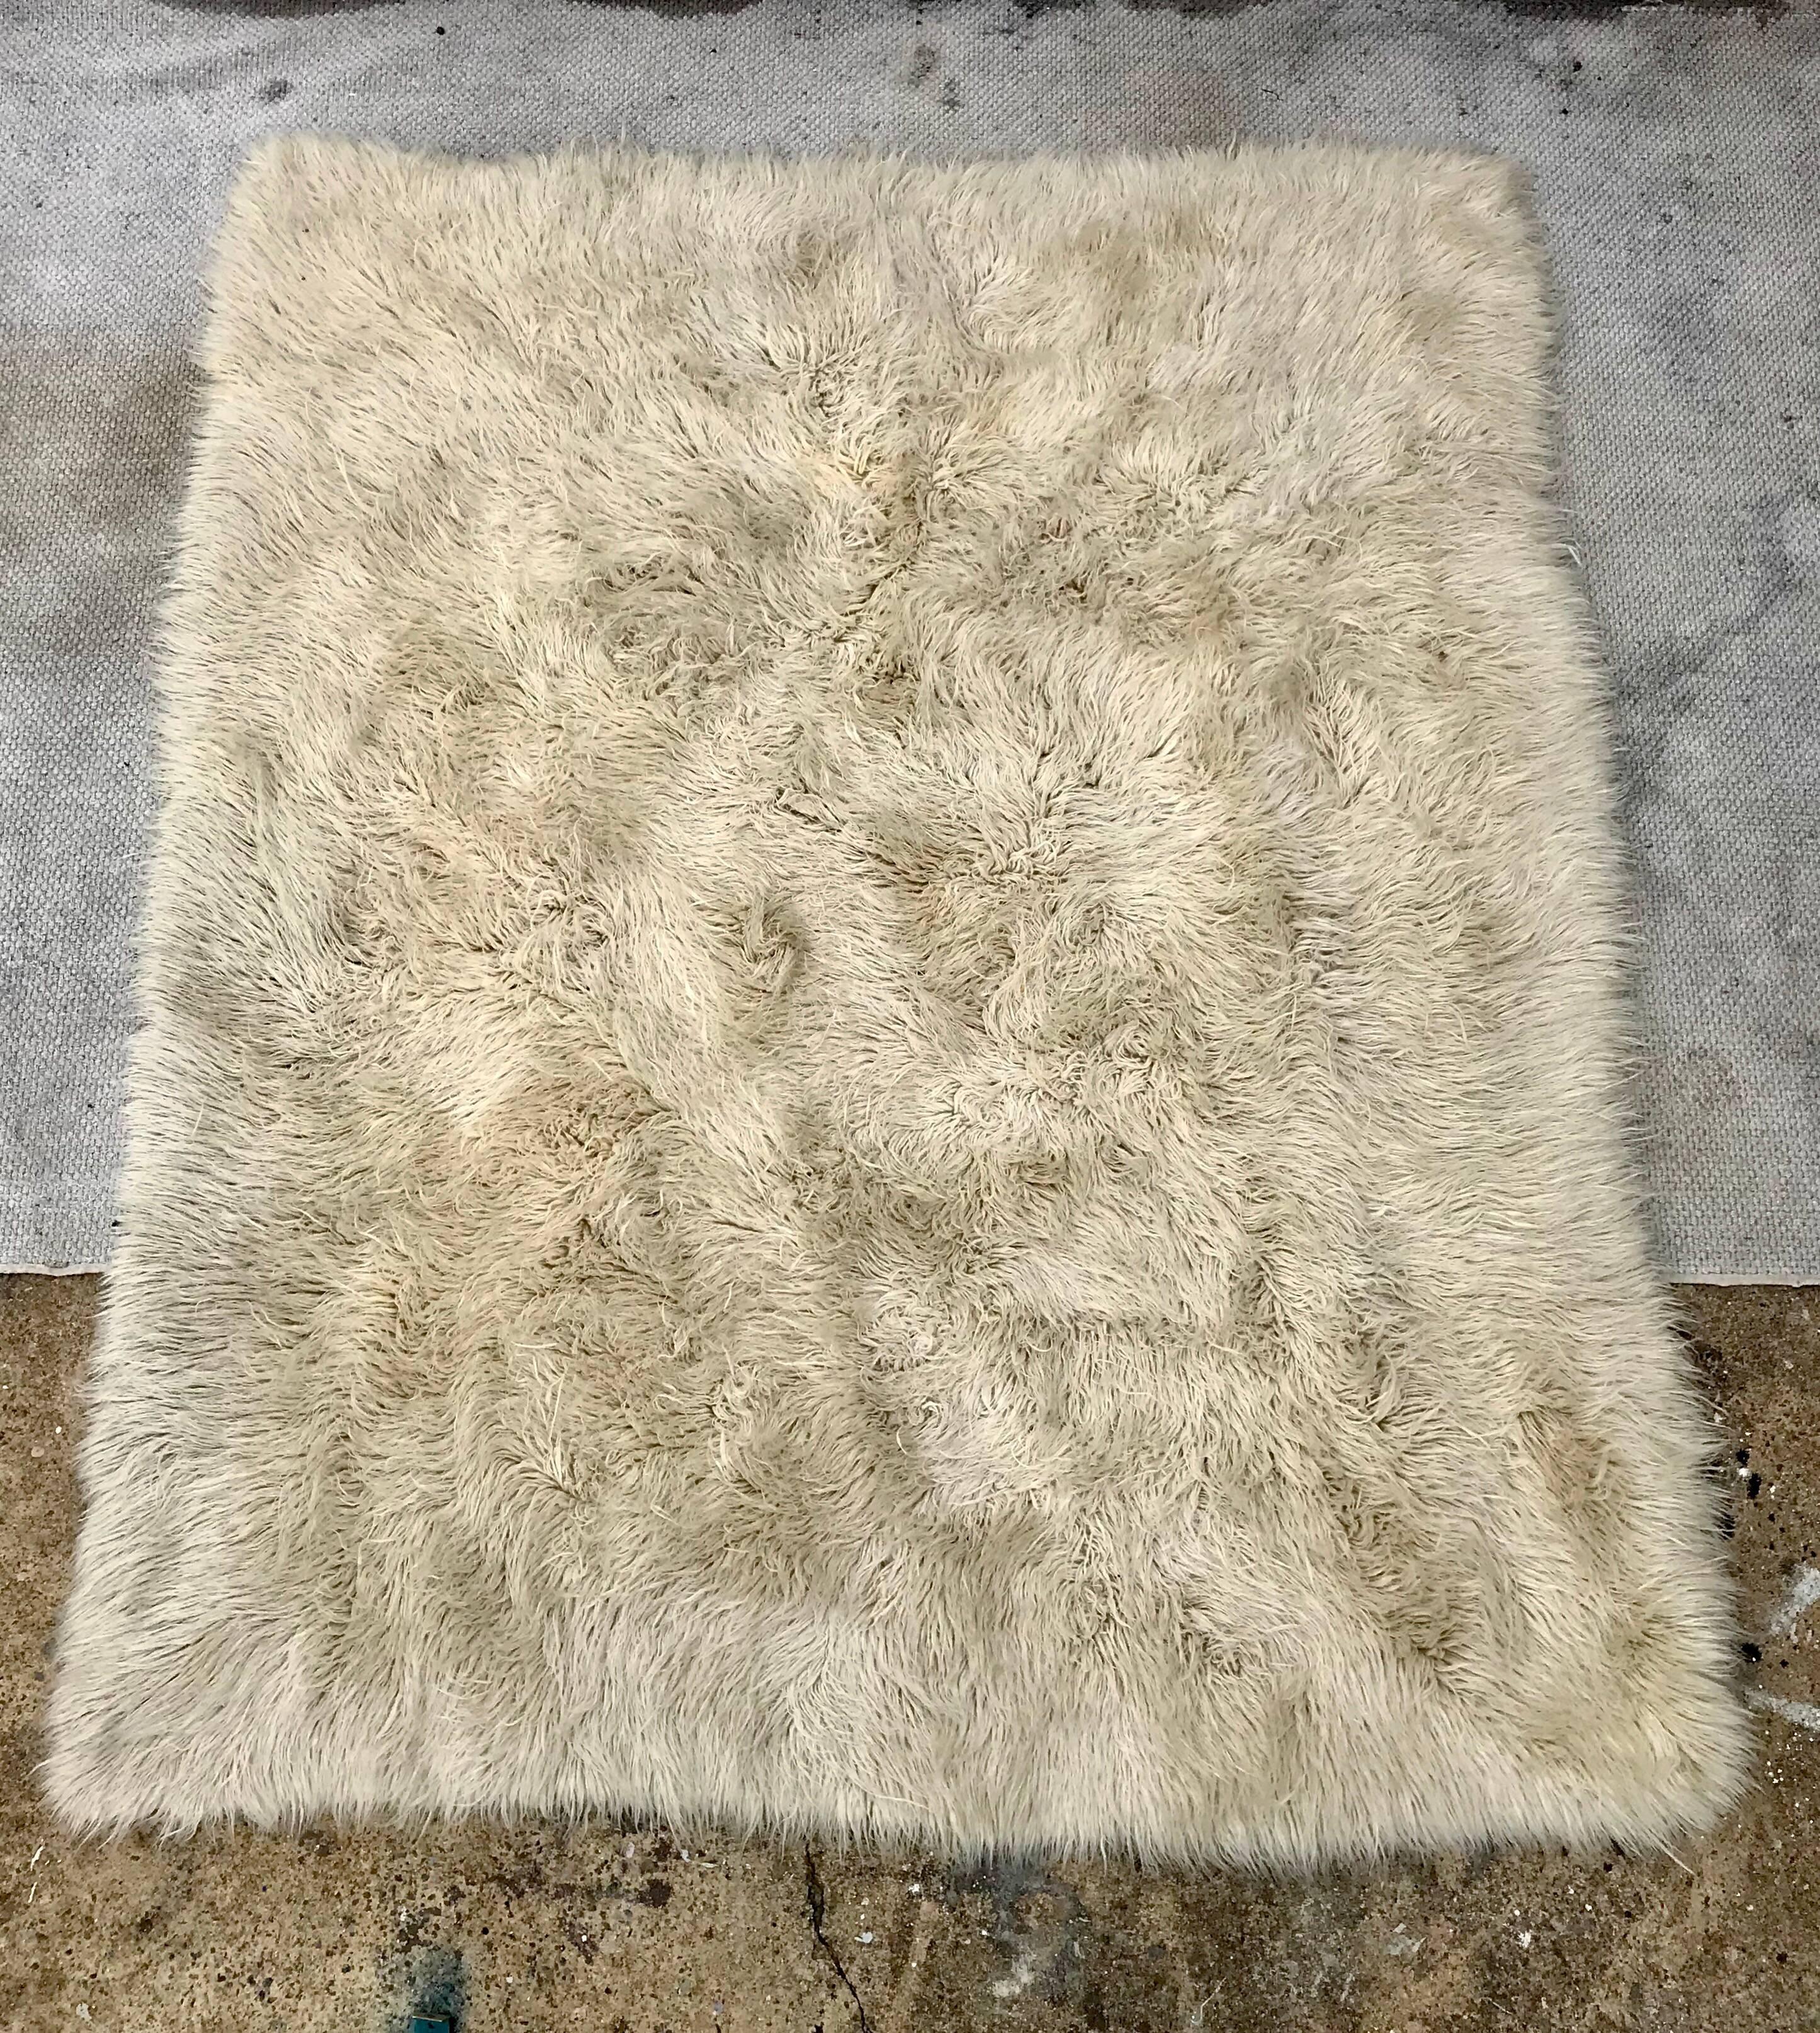 A high quality vintage 100% wool flokati rug by Athens, Greece rug maker Karamichos & Co. Boho chic hipness that feels as good as it looks.